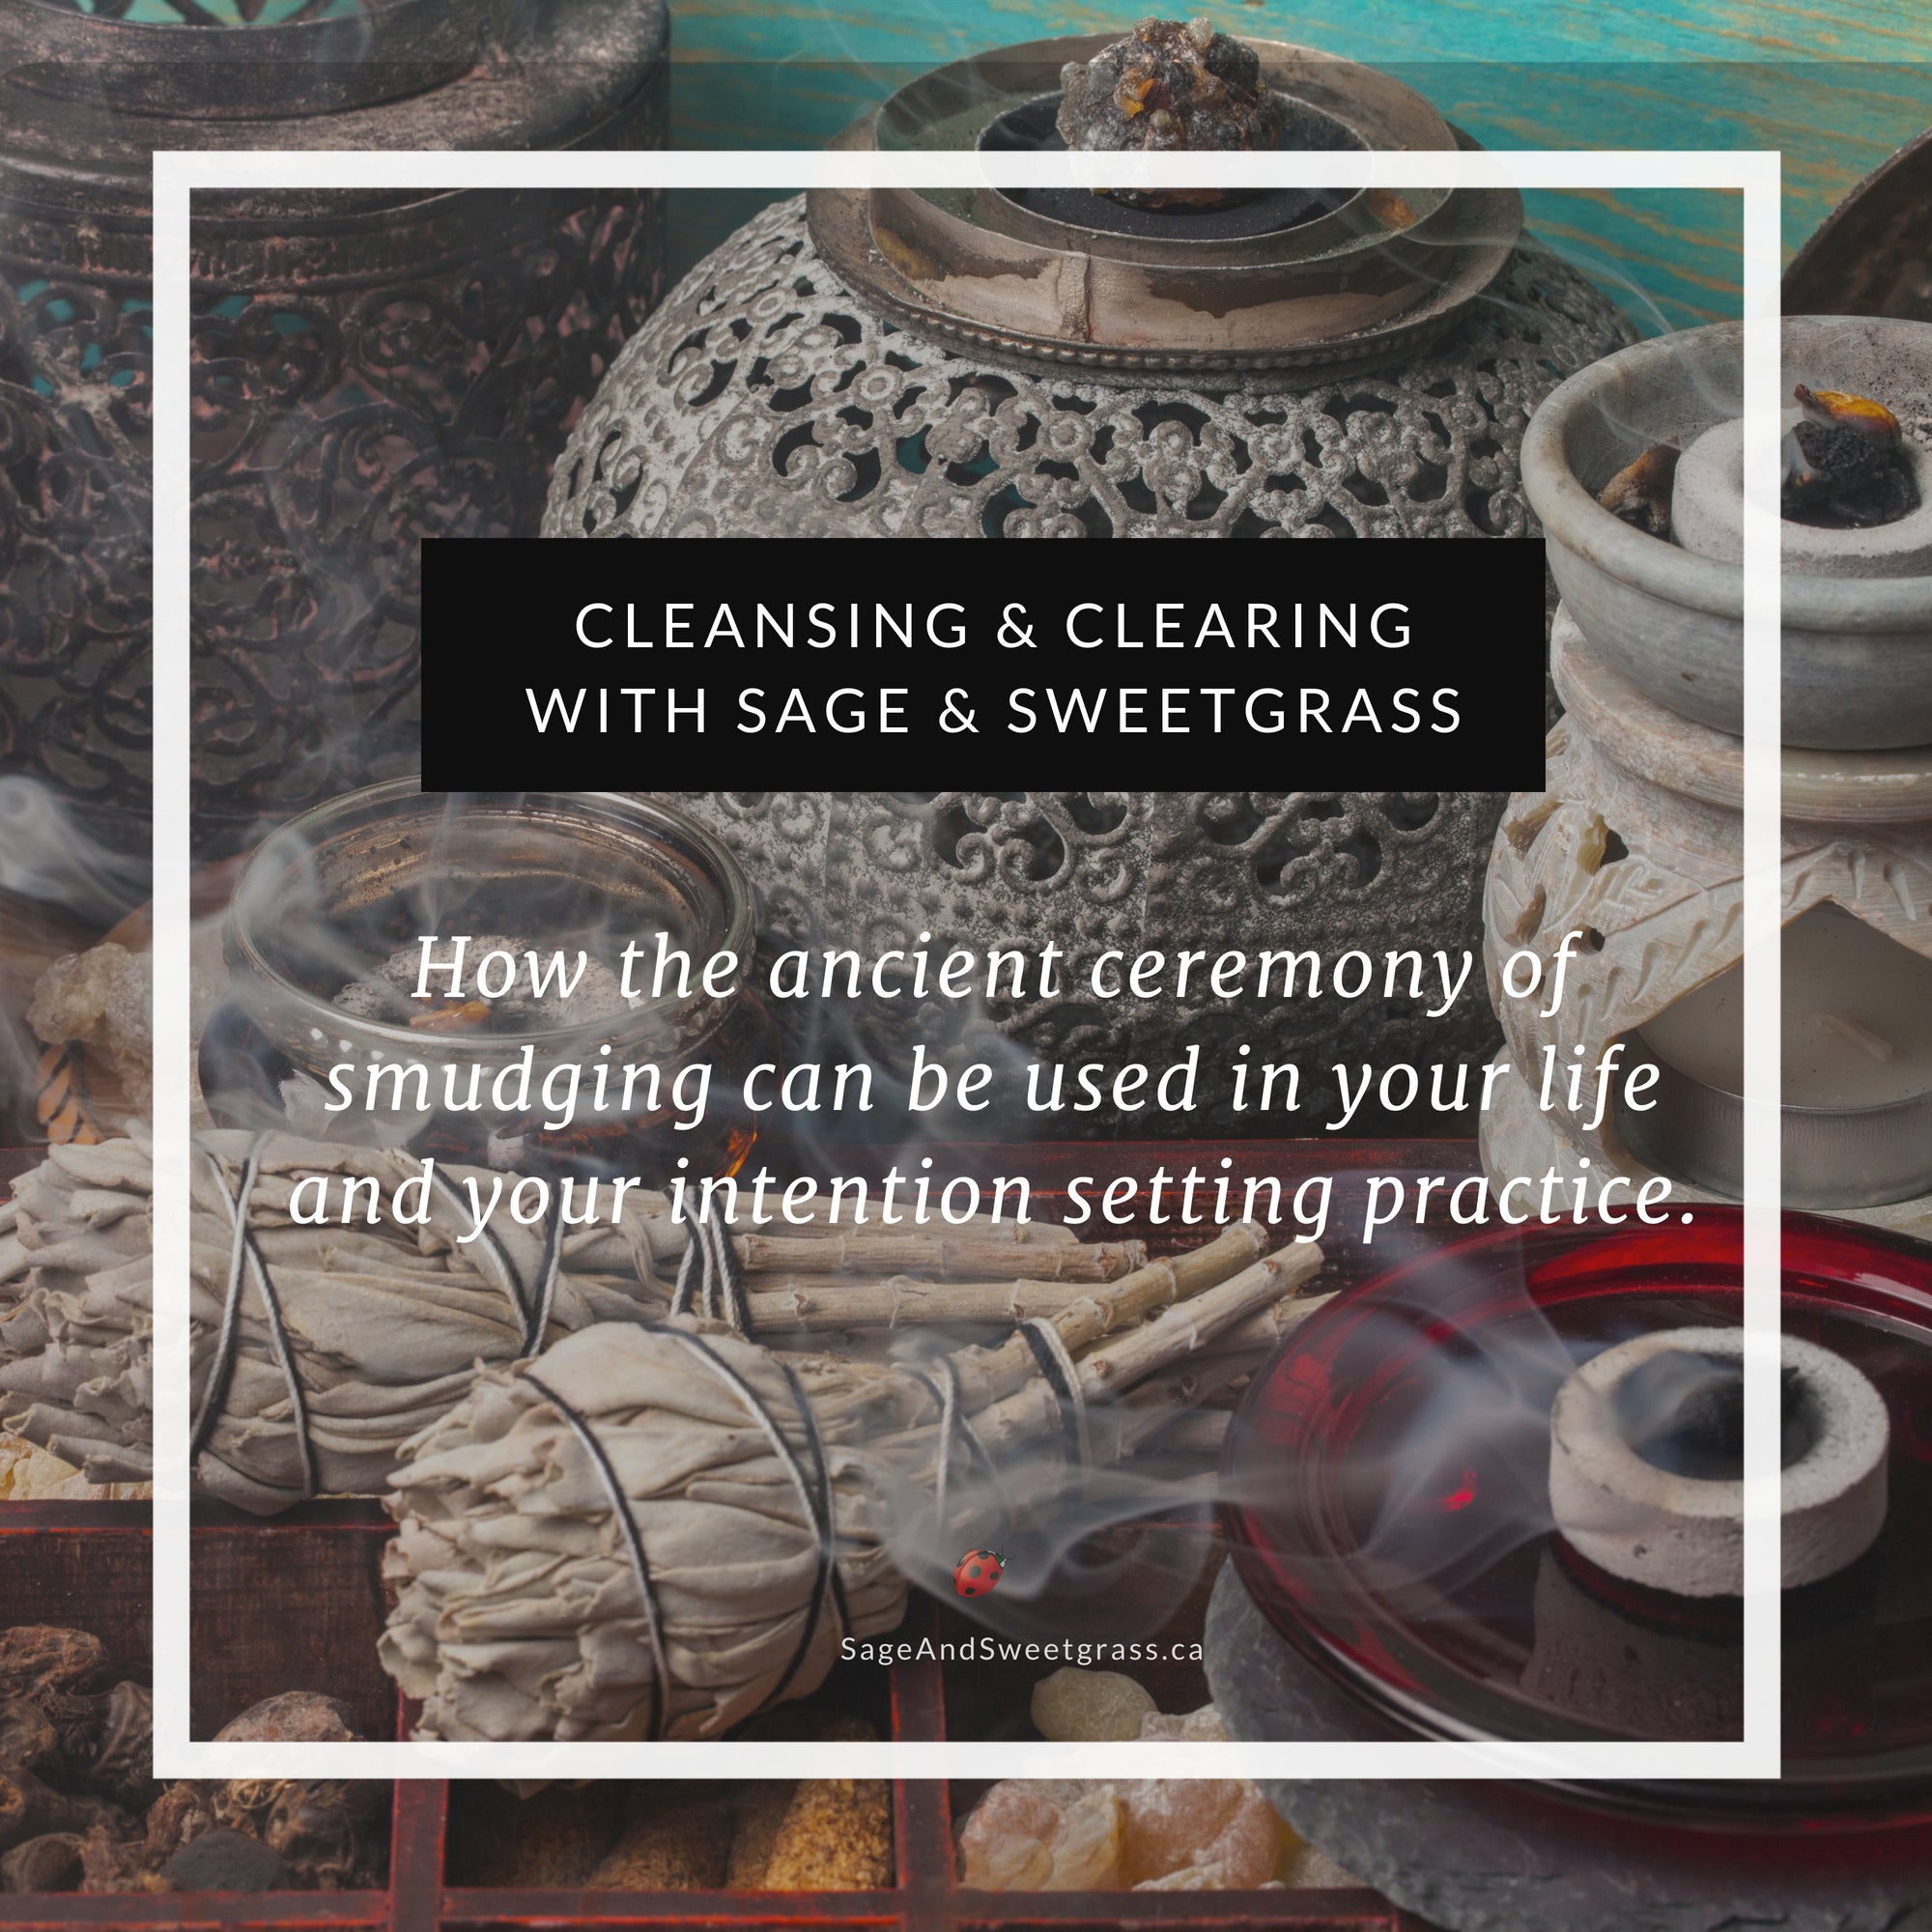 Cleansing & Clearing with the Smudging Ceremony